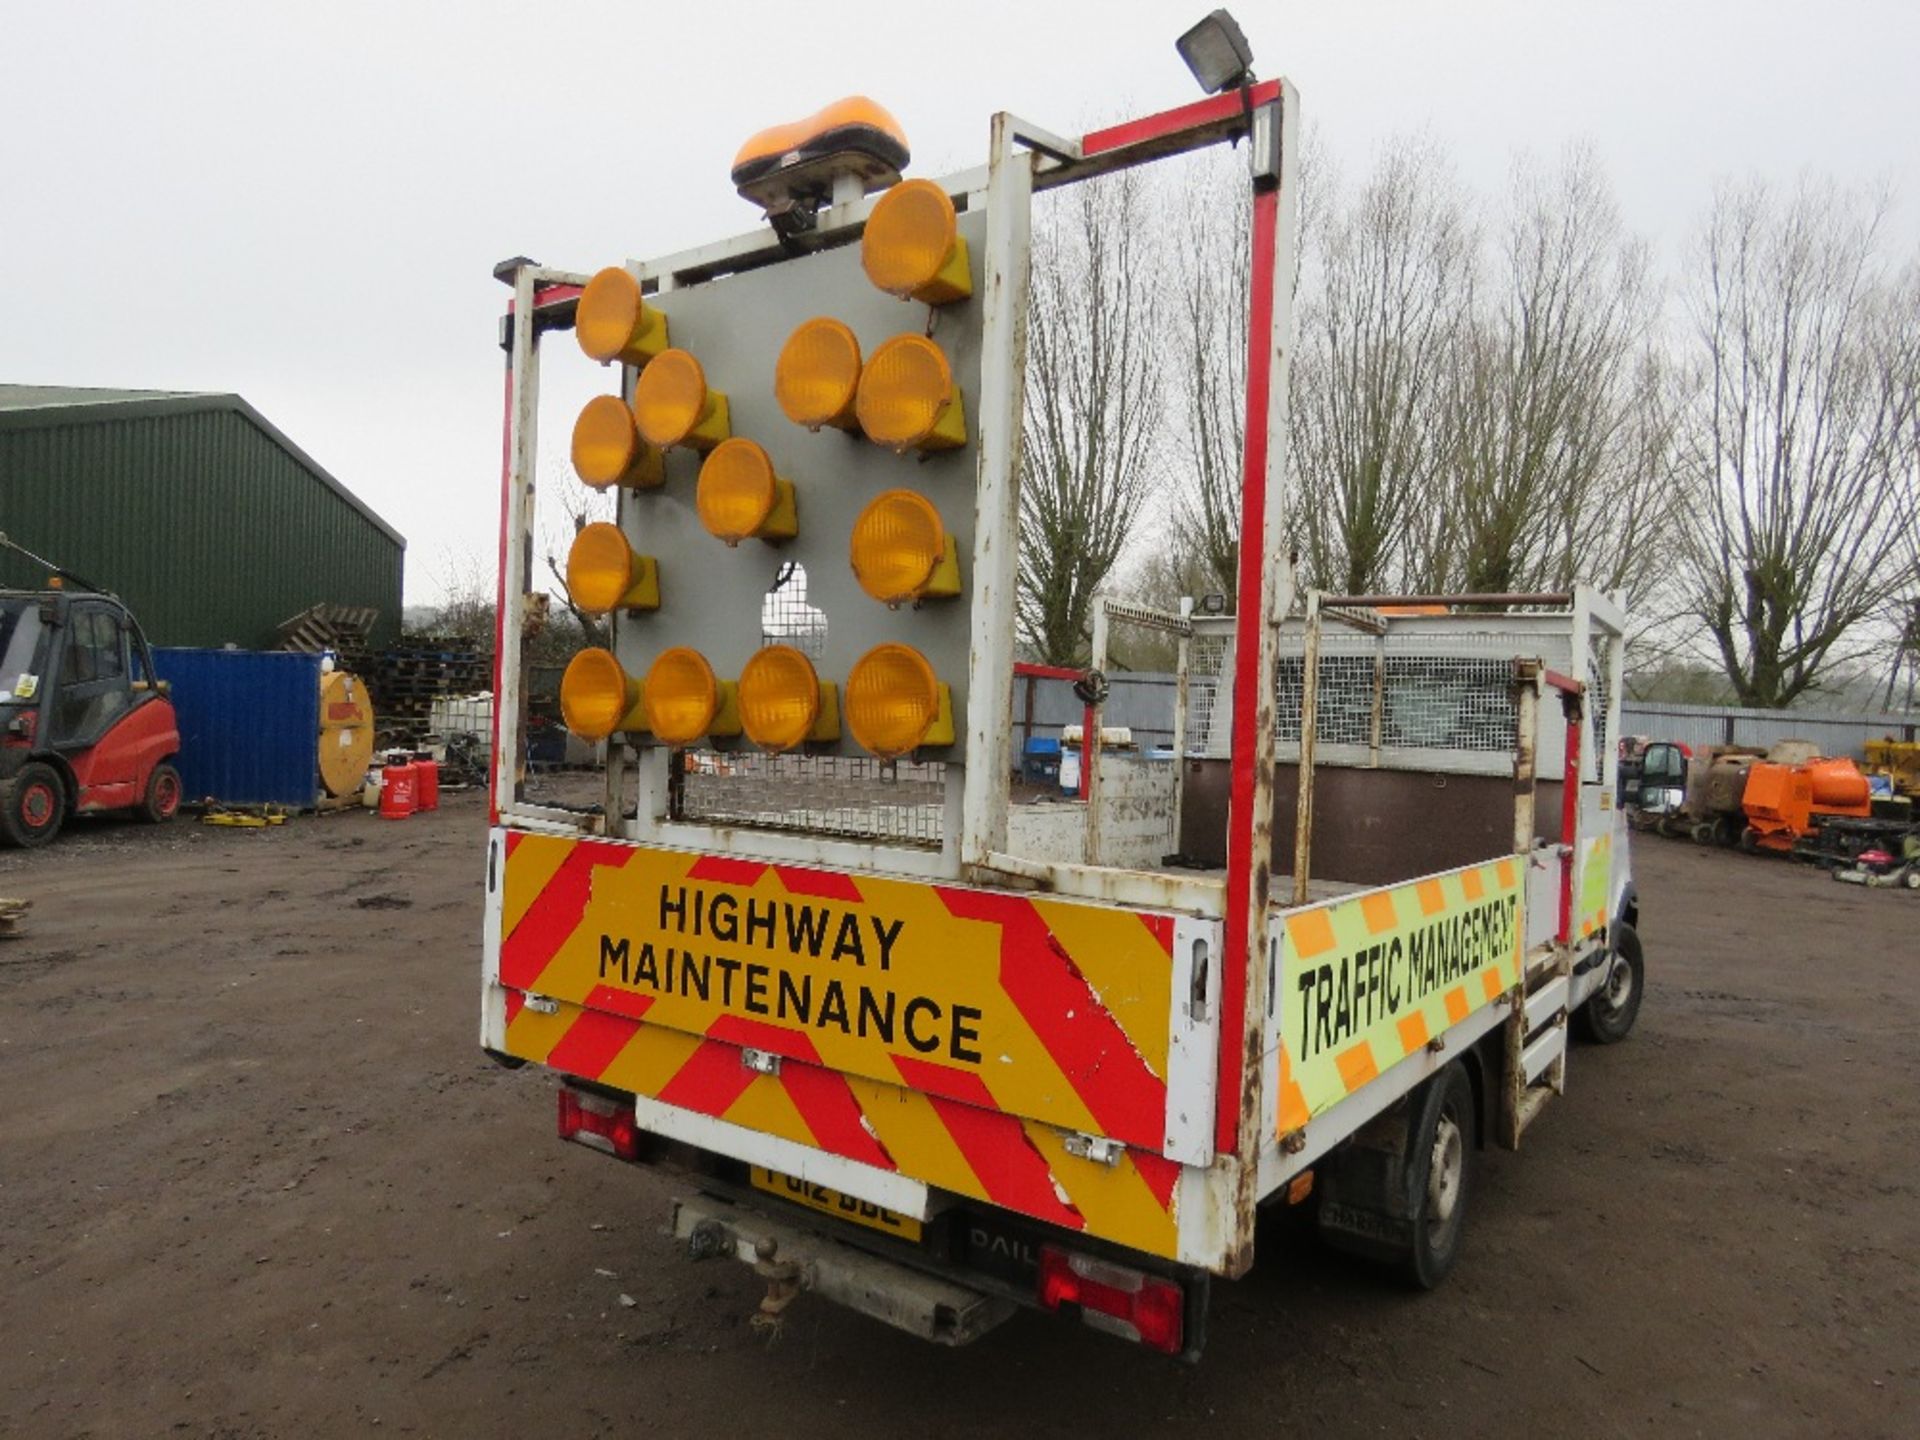 IVECO 35S13 TRAFFIC MANAGEMENT 3.5 TONNE DROP SIDE TRUCK REG: PO12 BBE. WITH V5 AND MOT UNTIL 26/04/ - Image 3 of 12